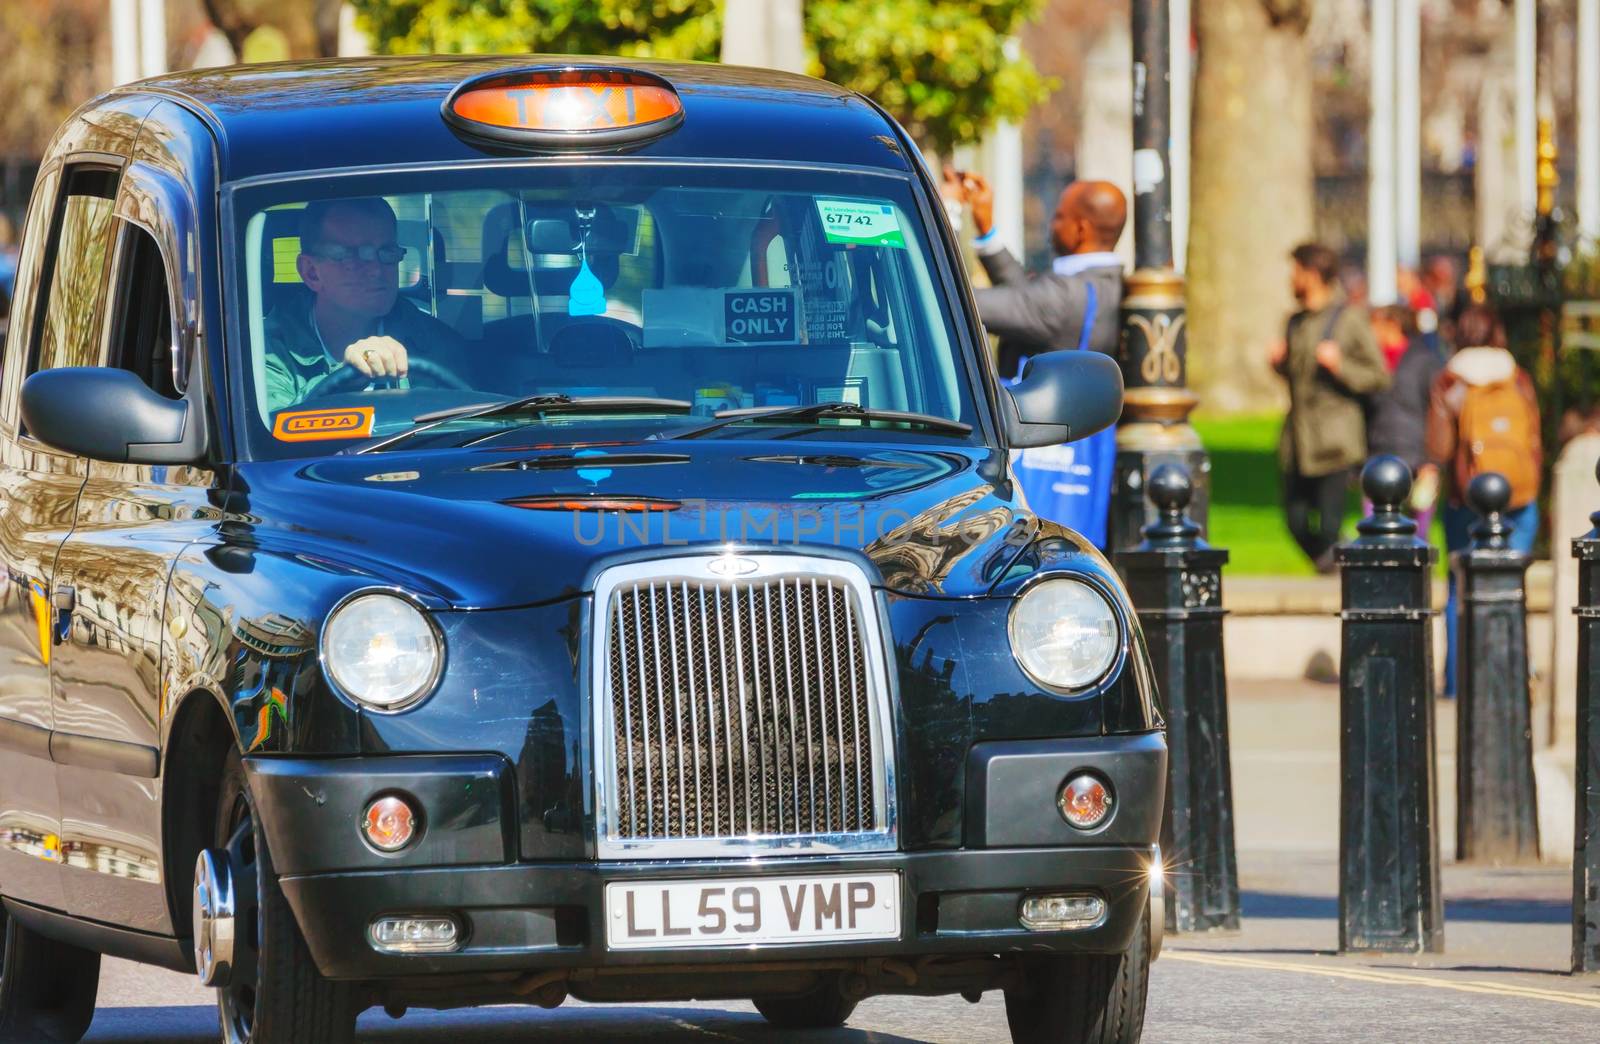 LONDON - APRIL 12: Famous taxi cab (hackney) an a street on April 12, 2015 in London, UK. A hackney or hackney carriage (also called a cab, black cab, hack or London taxi) is a carriage or automobile for hire.